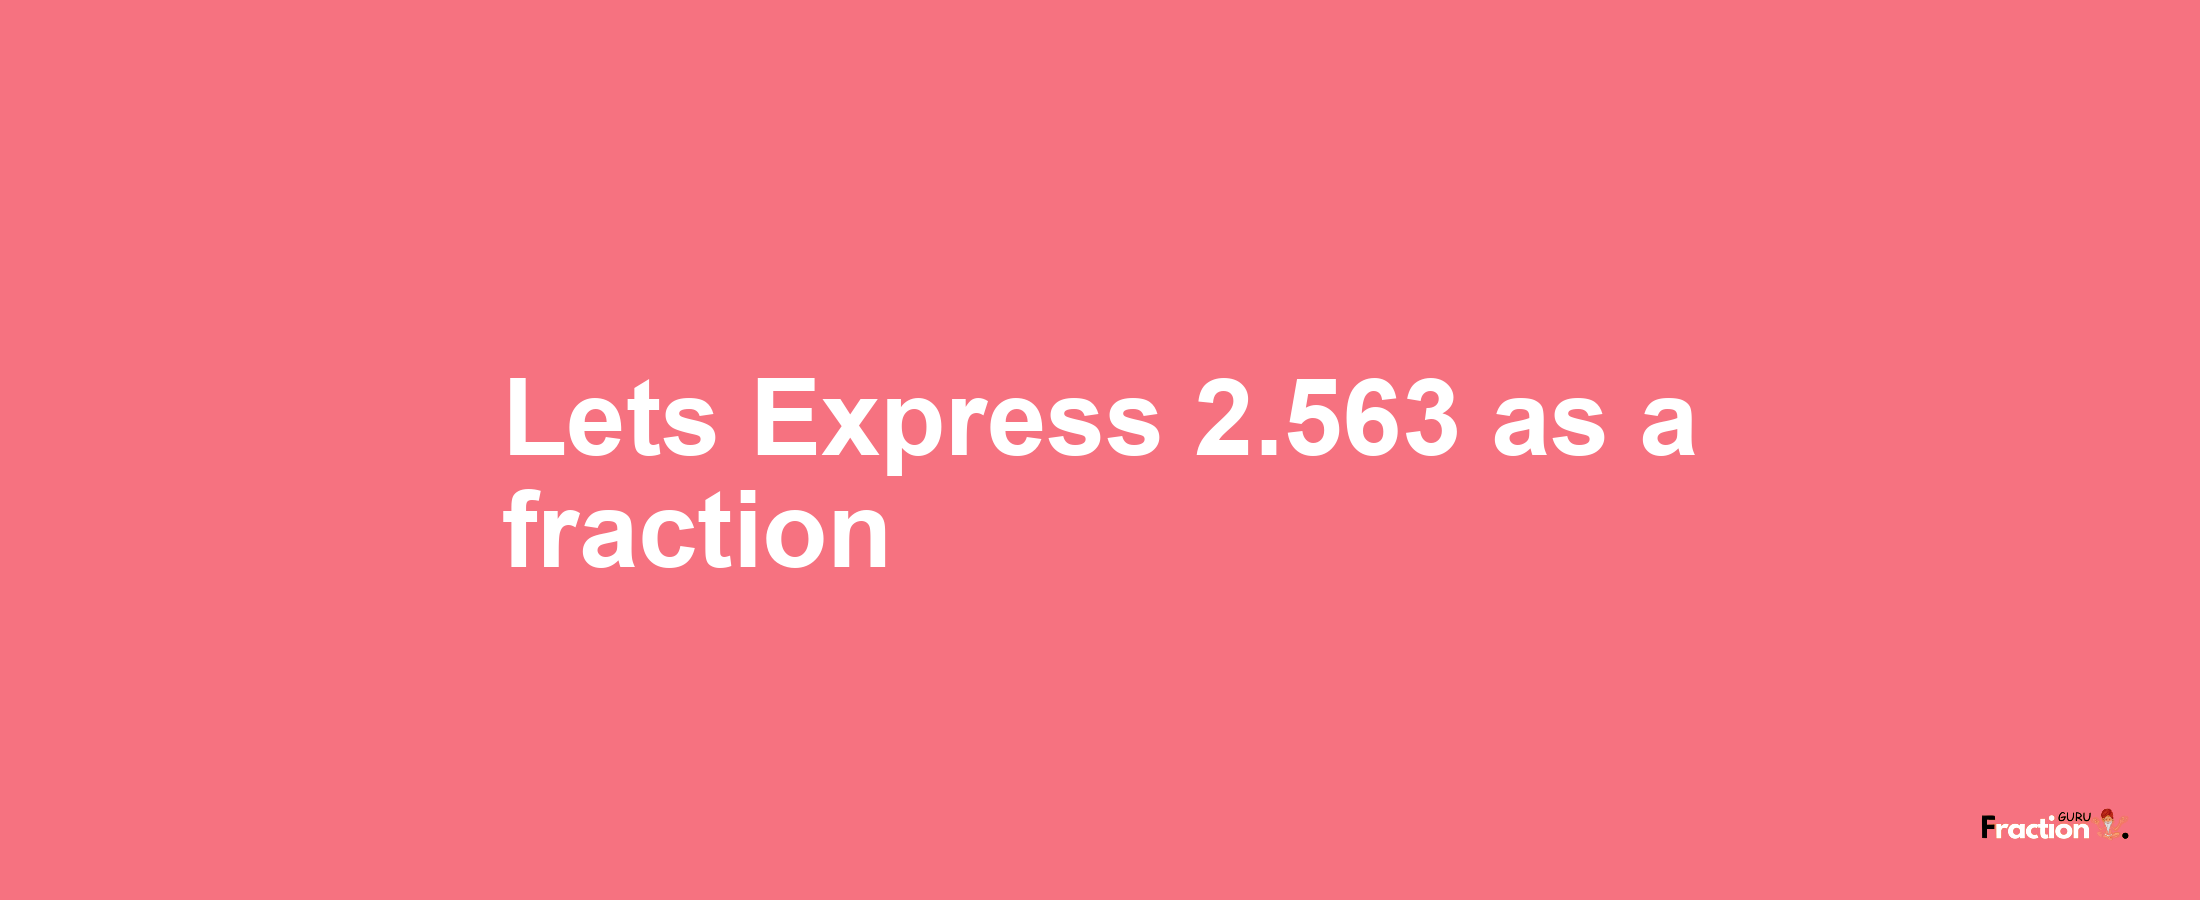 Lets Express 2.563 as afraction